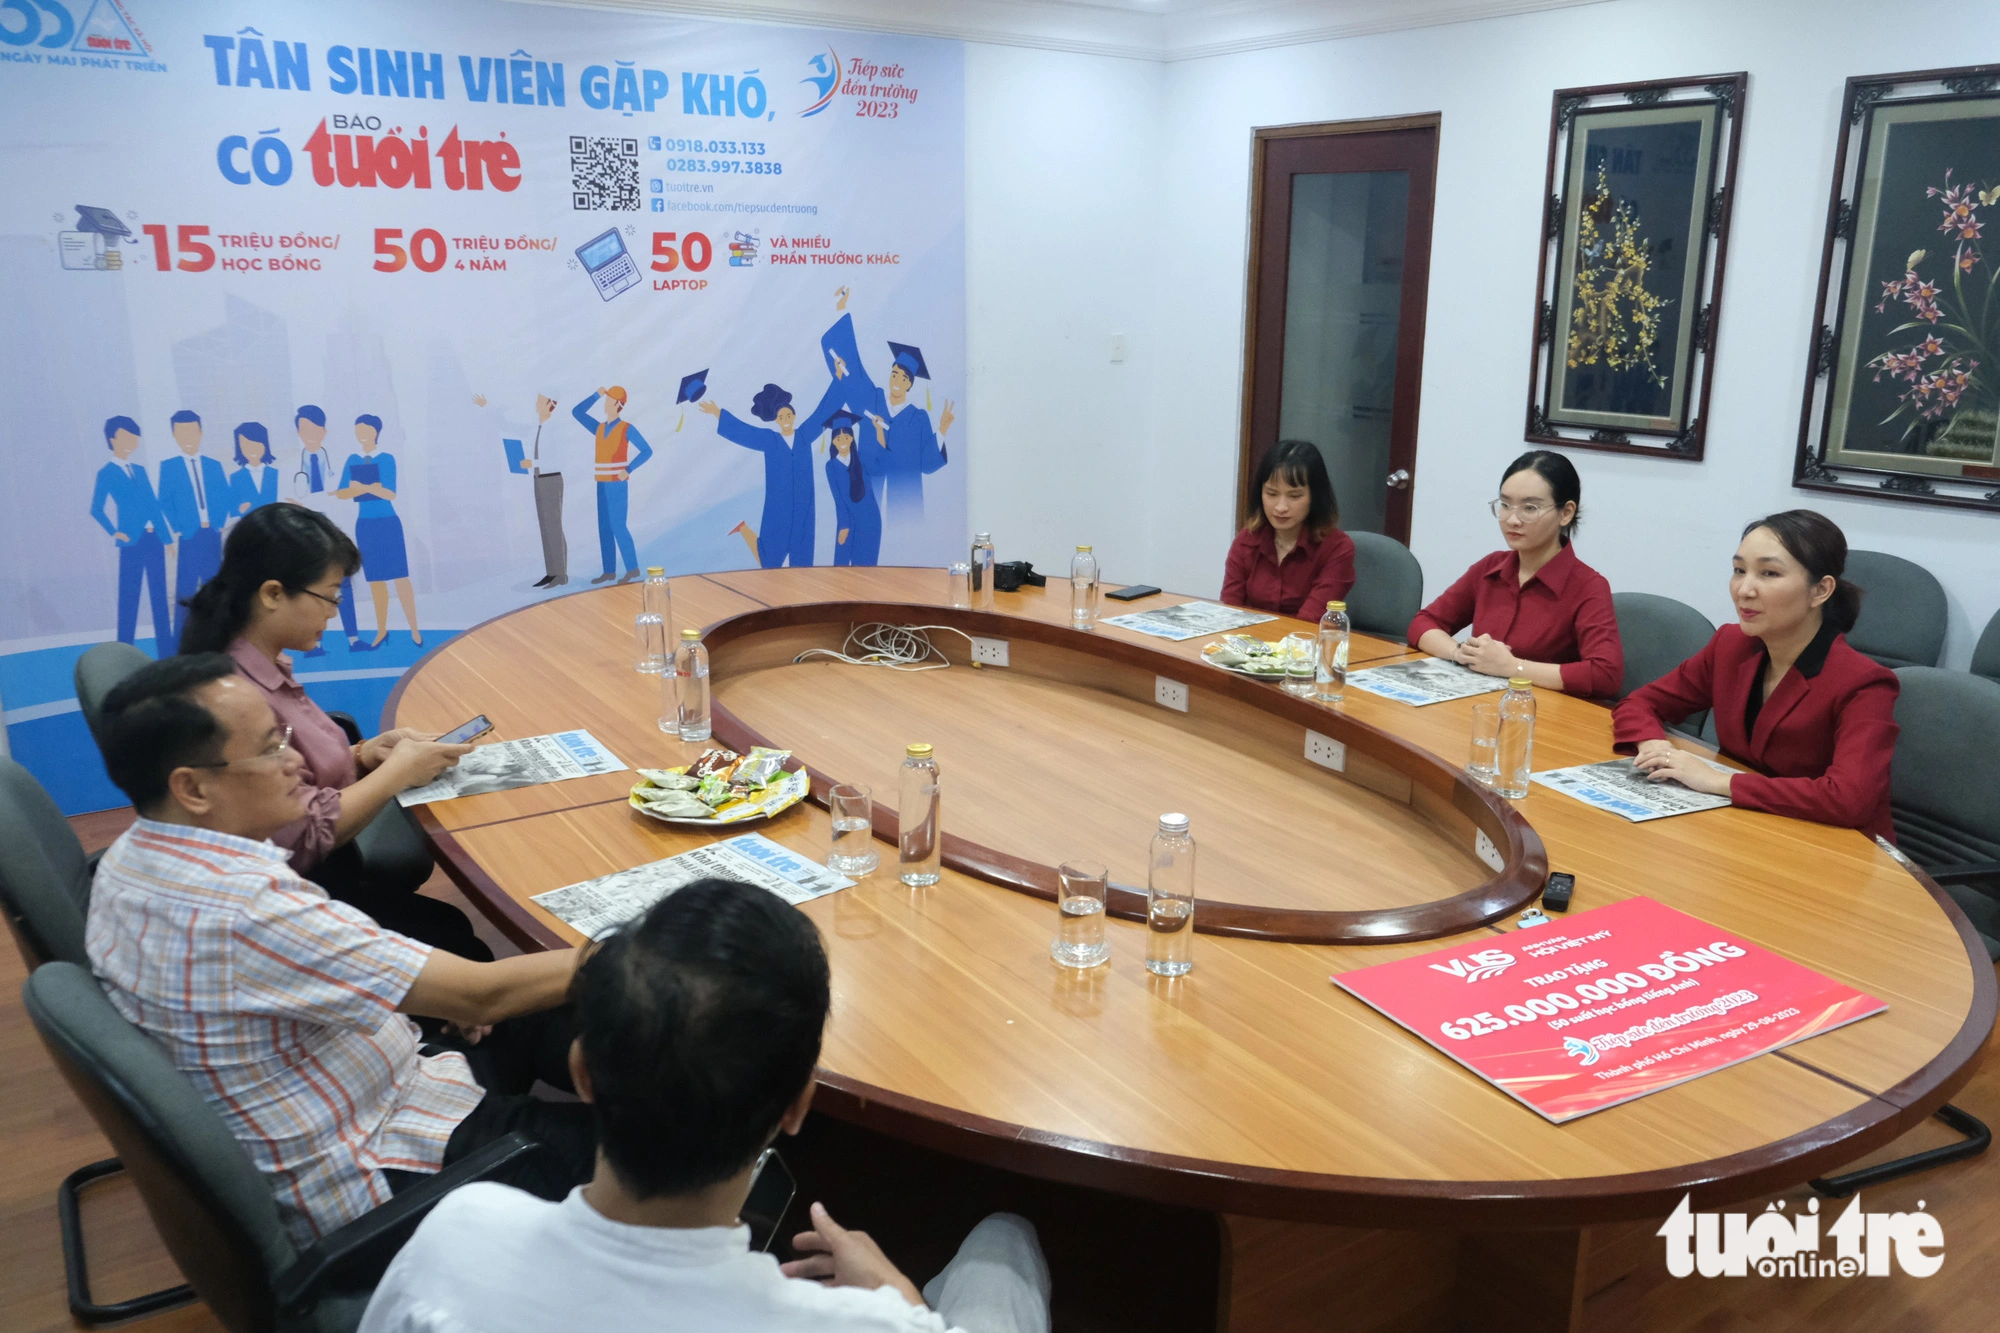 Representative of the Vietnamese American Association (VUS) English System sent 50 English scholarships for IELTS preparation courses within the framework of the School Resilience Program - Photo: NGOC Phong